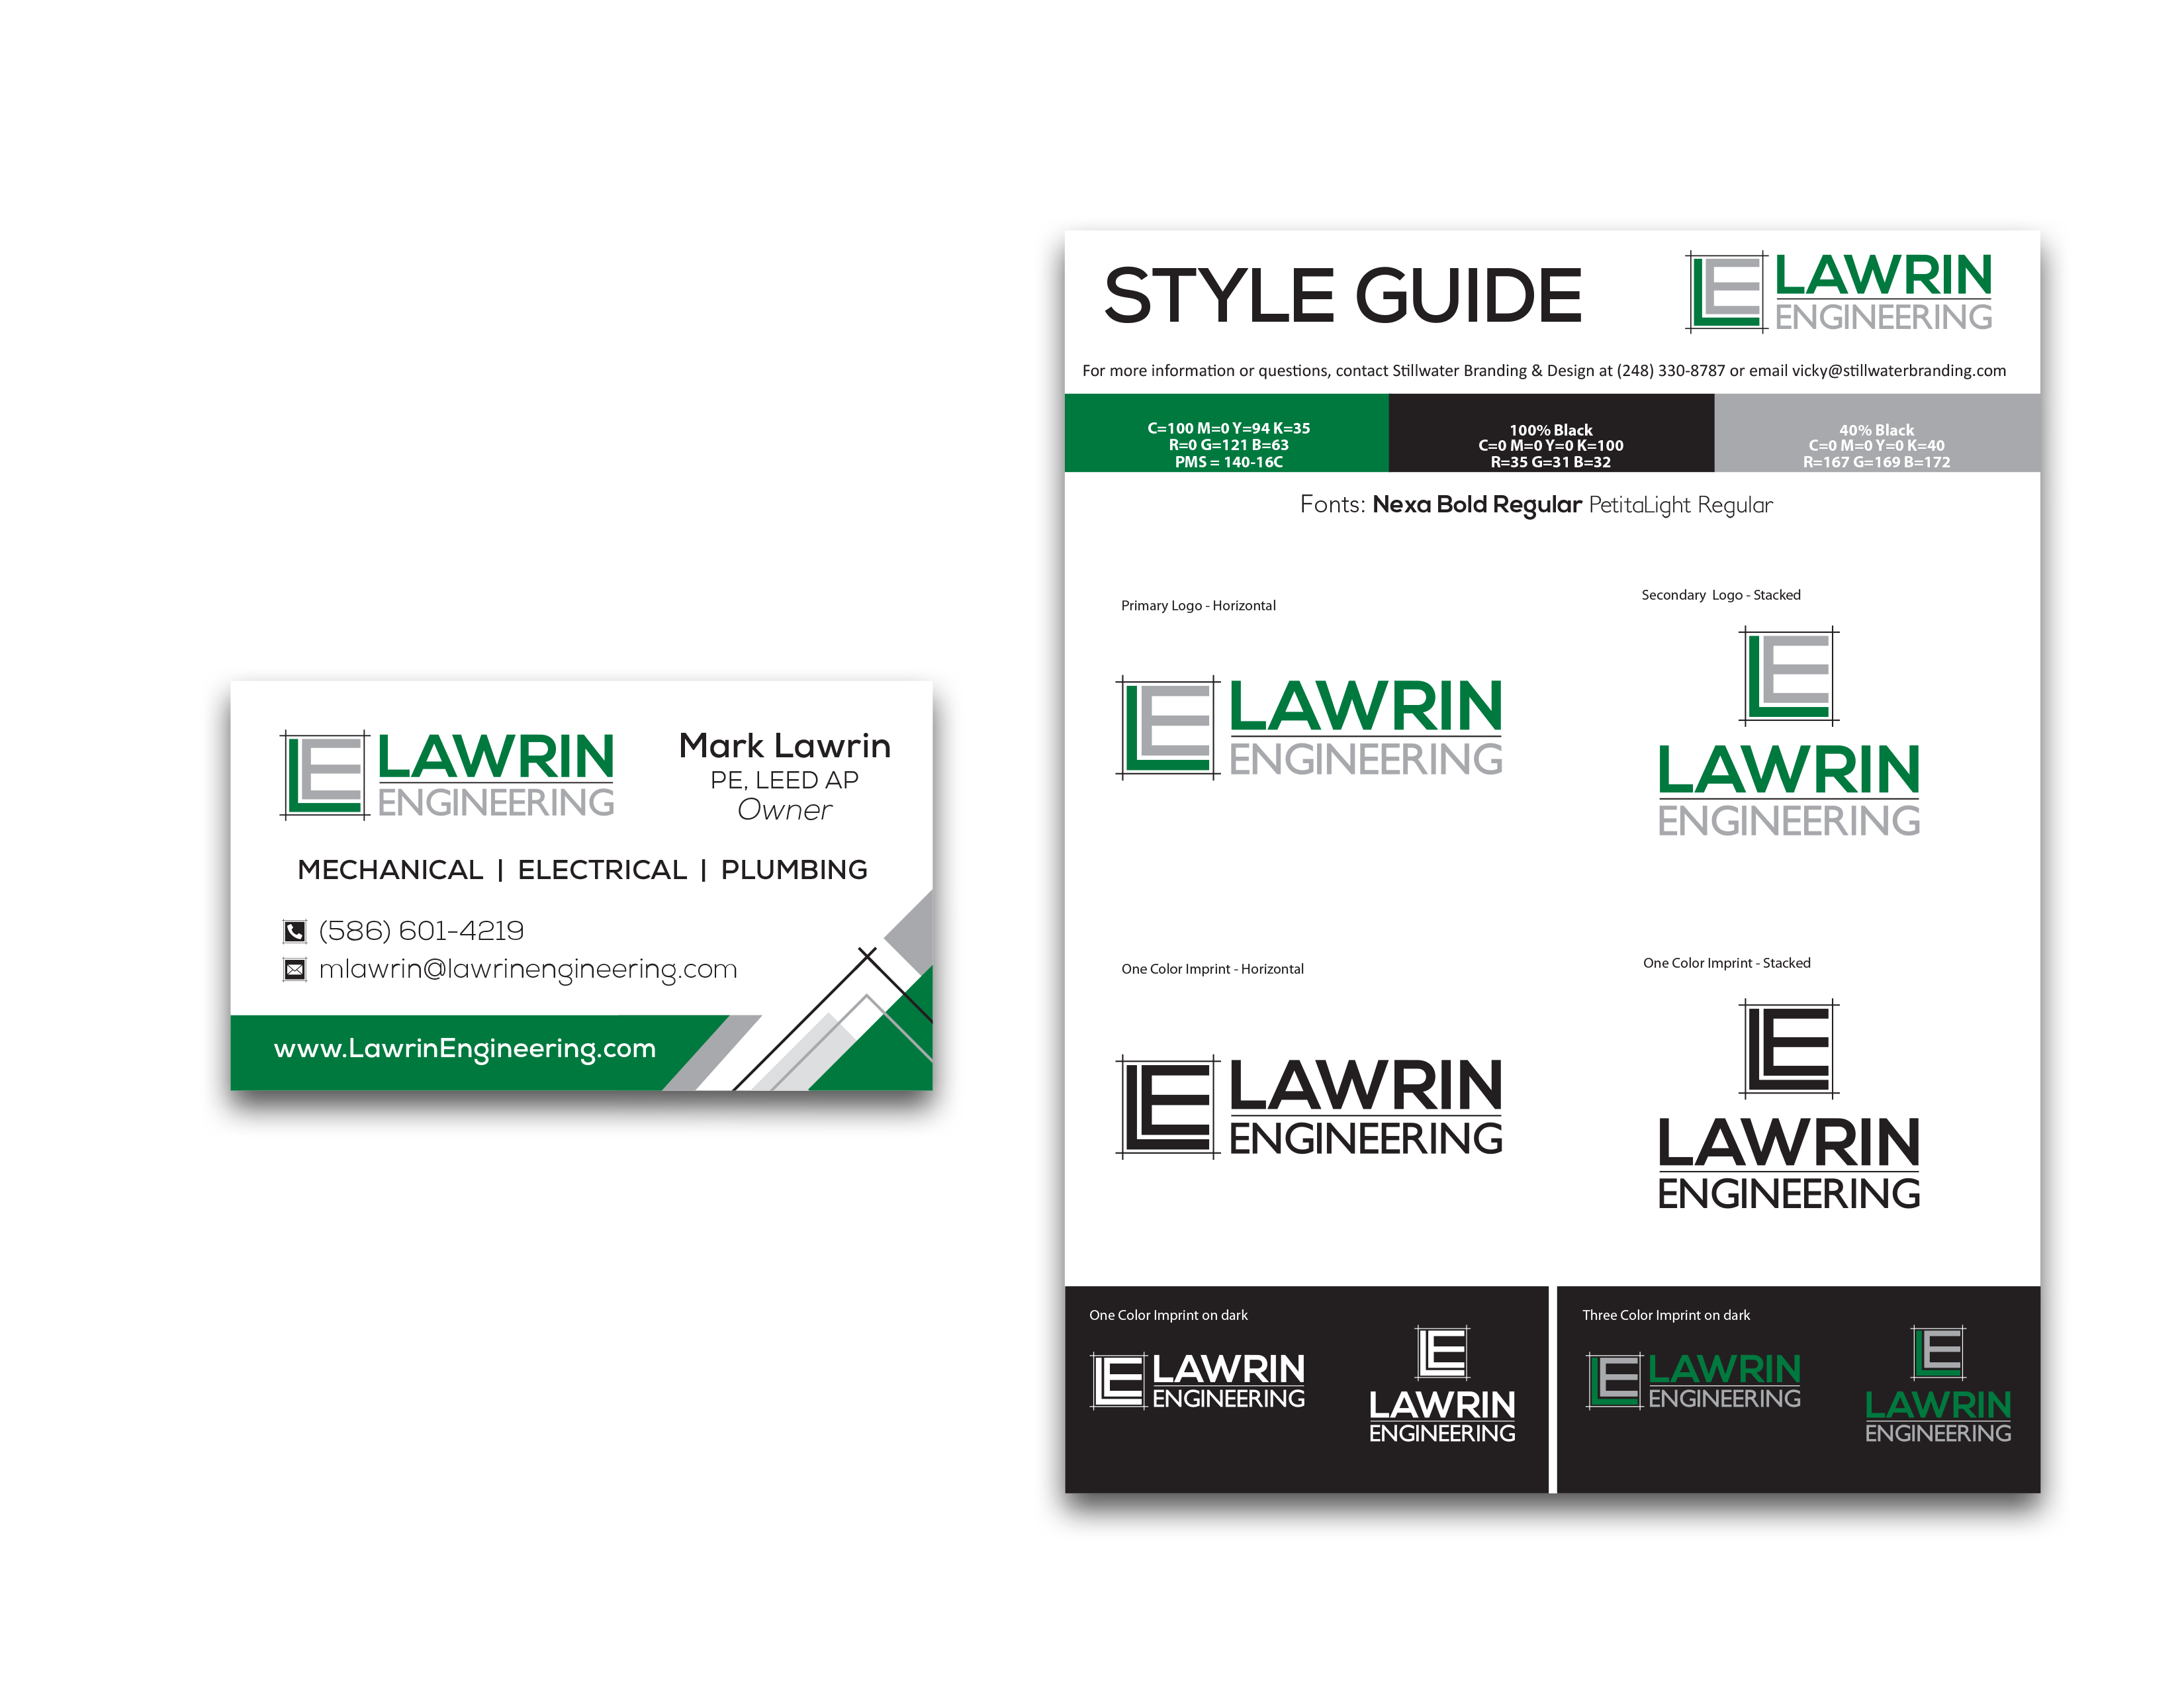 business cards (Mark Lawrin), style guide